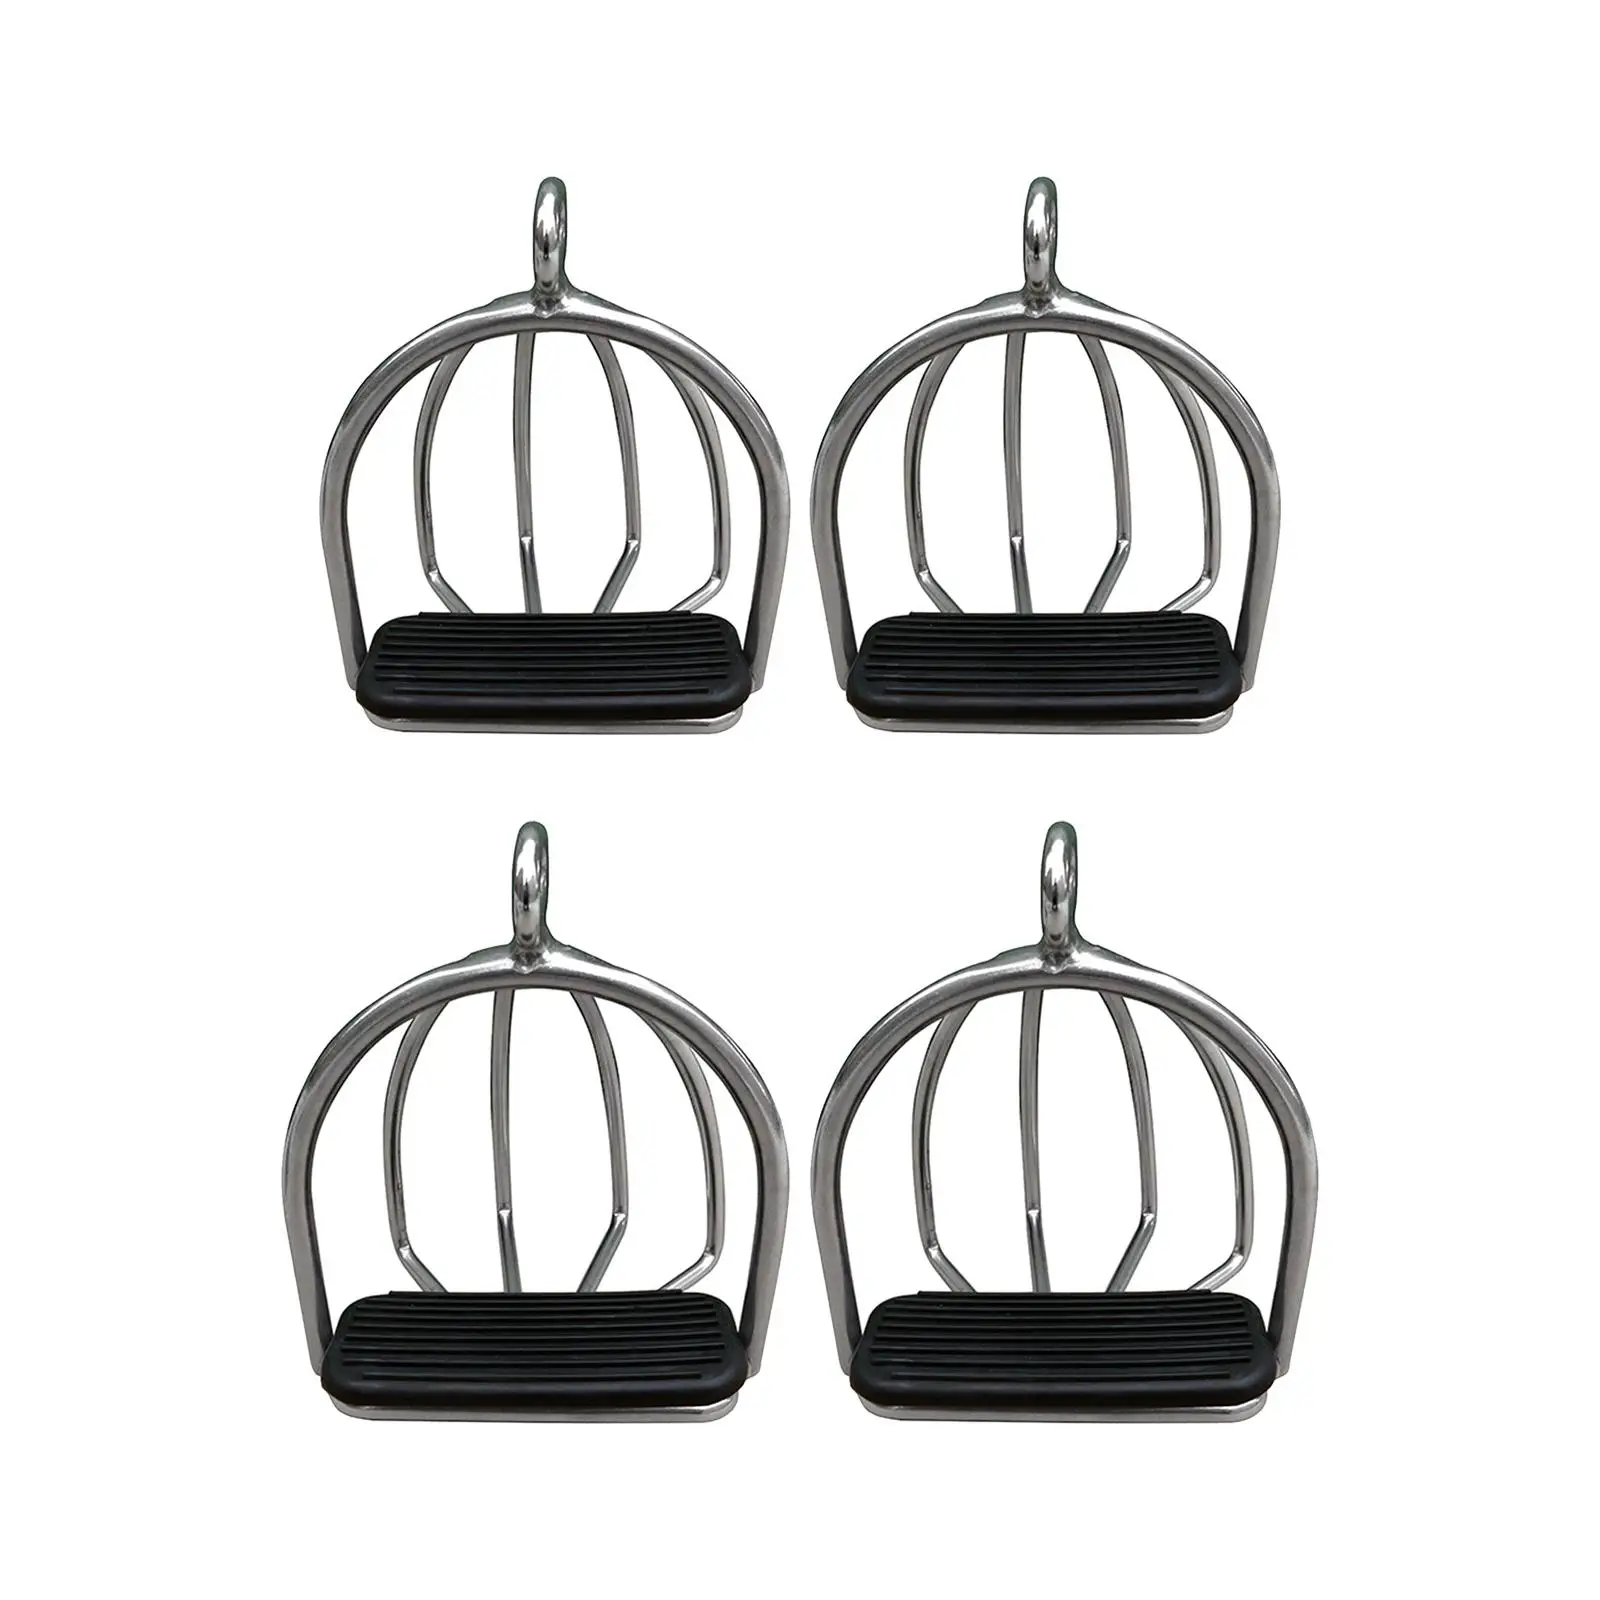 2Pcs Cage Horse Riding Stirrups Rubber Pad Non Slip for Horse Riding Kids Equipment